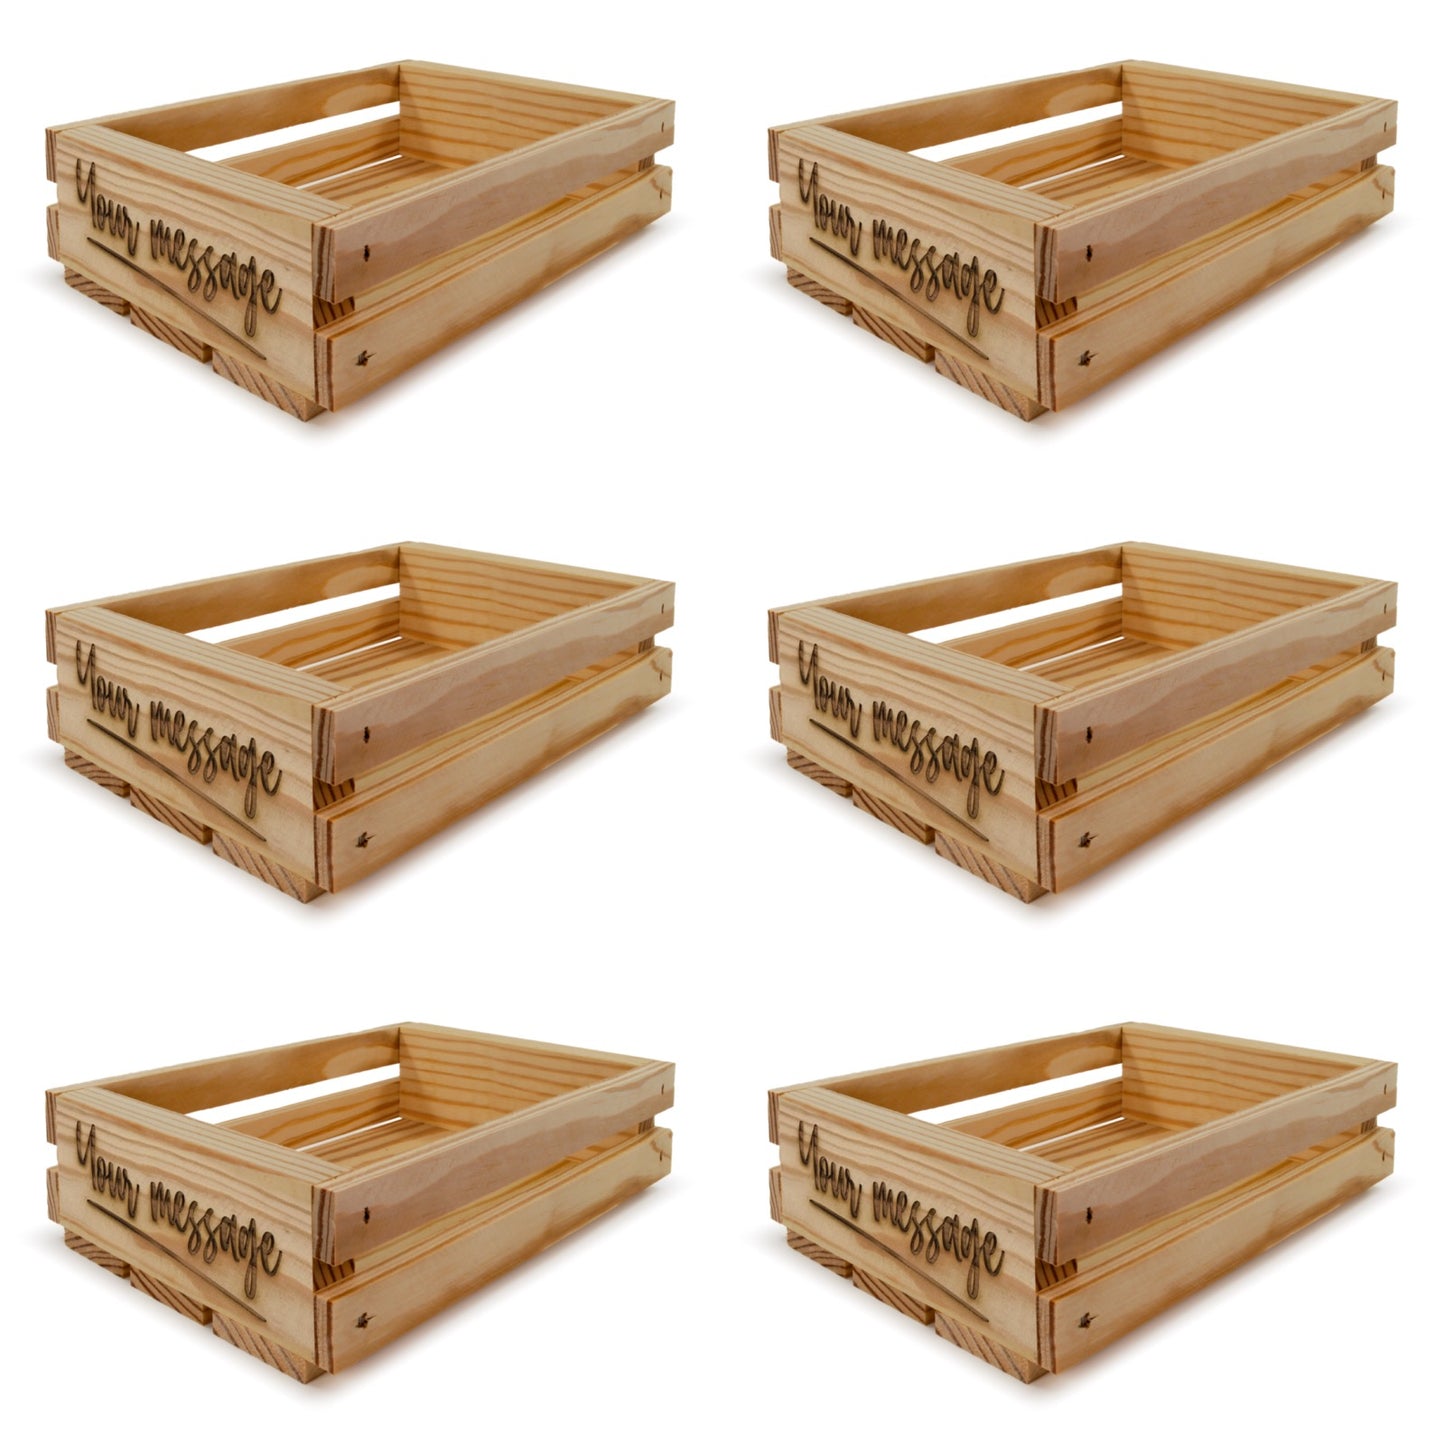 6 Small wooden crates 8x6x2.5 your message included